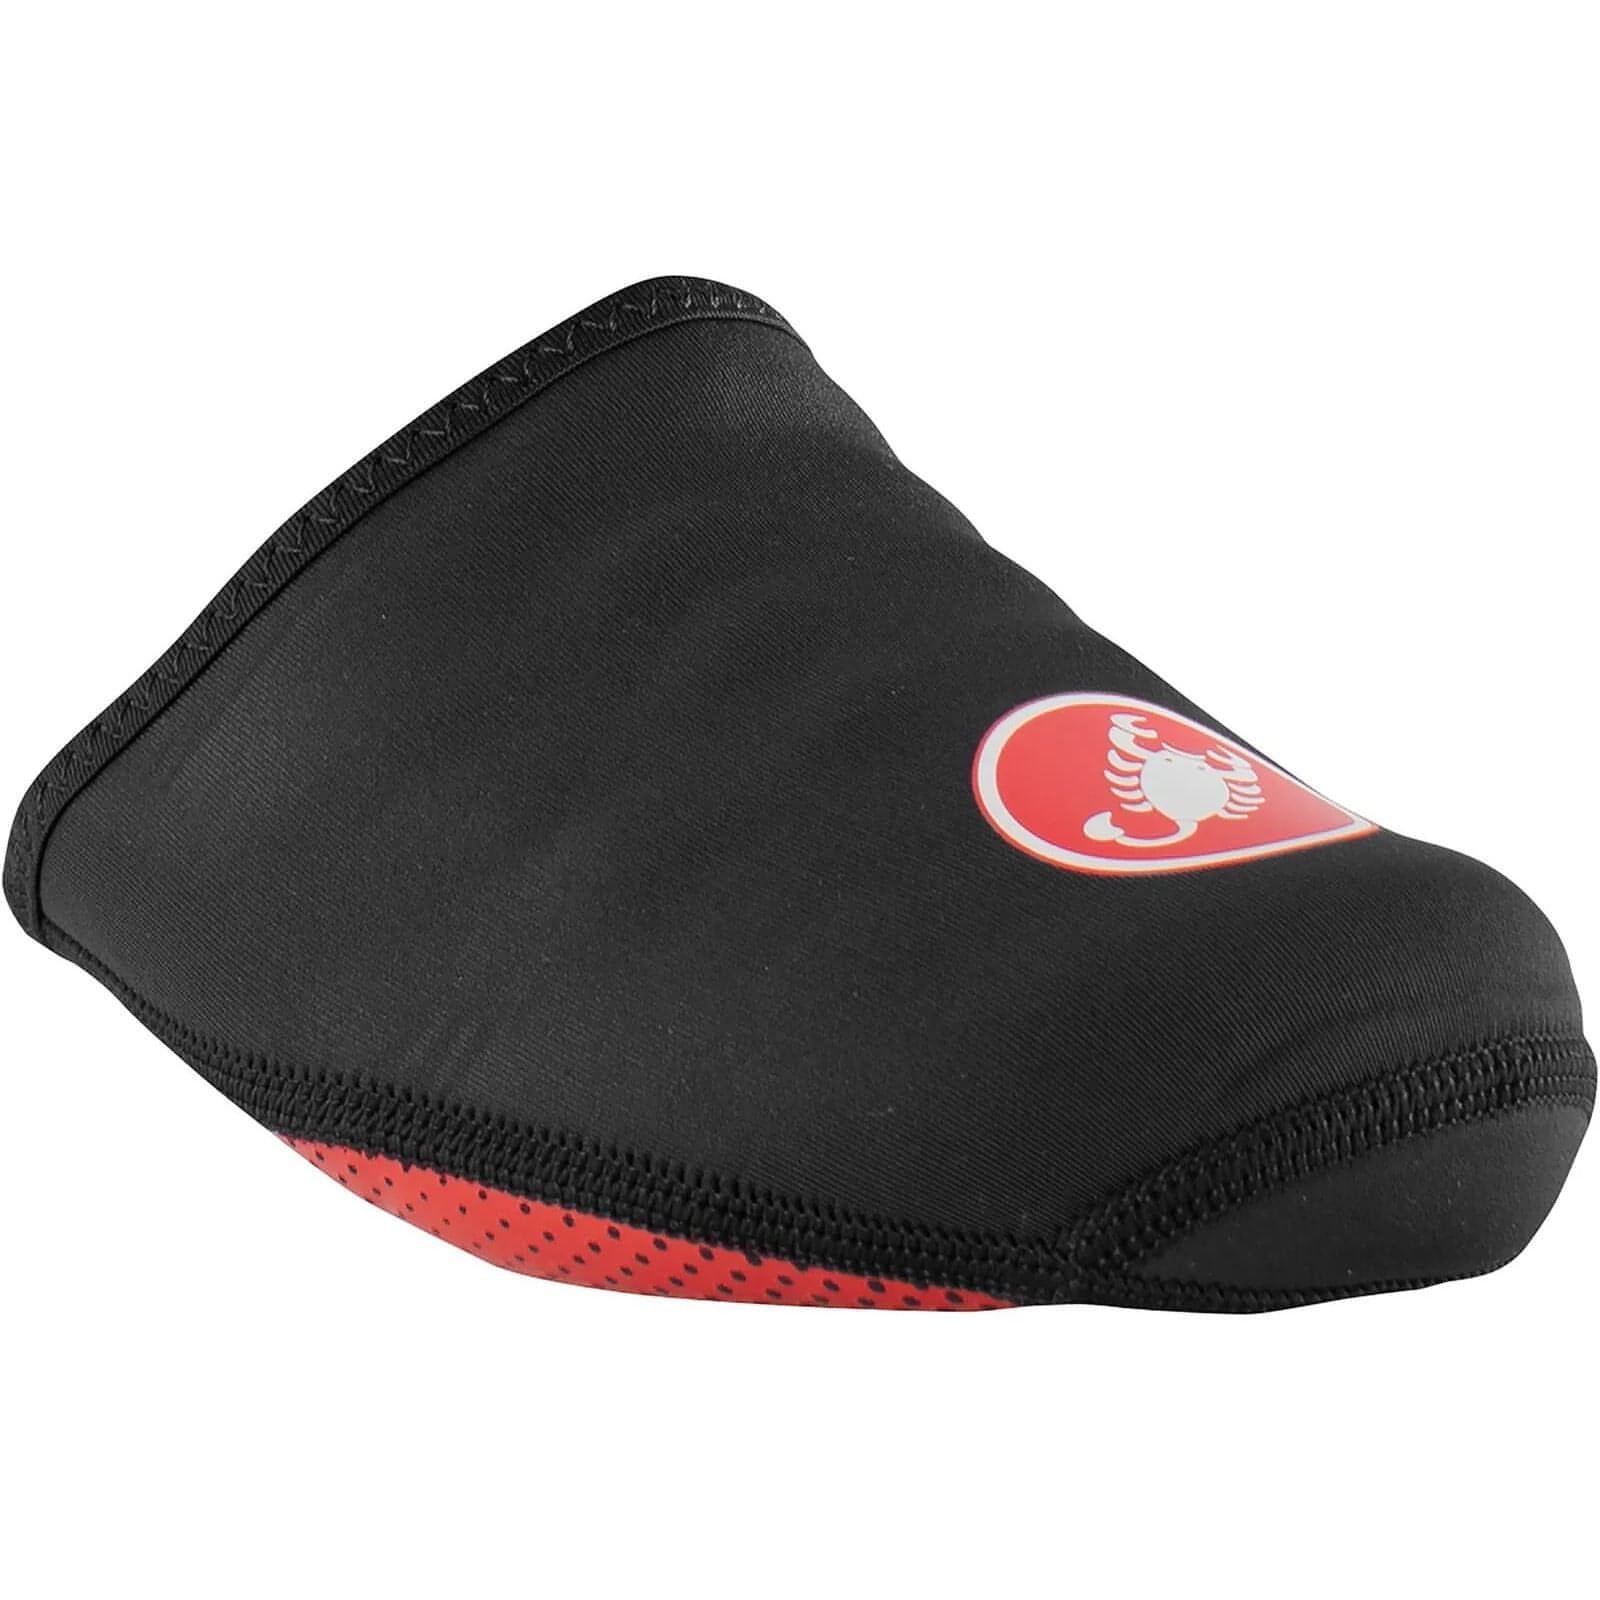 Castelli Toe Thingy Toe Cover Front - Front View